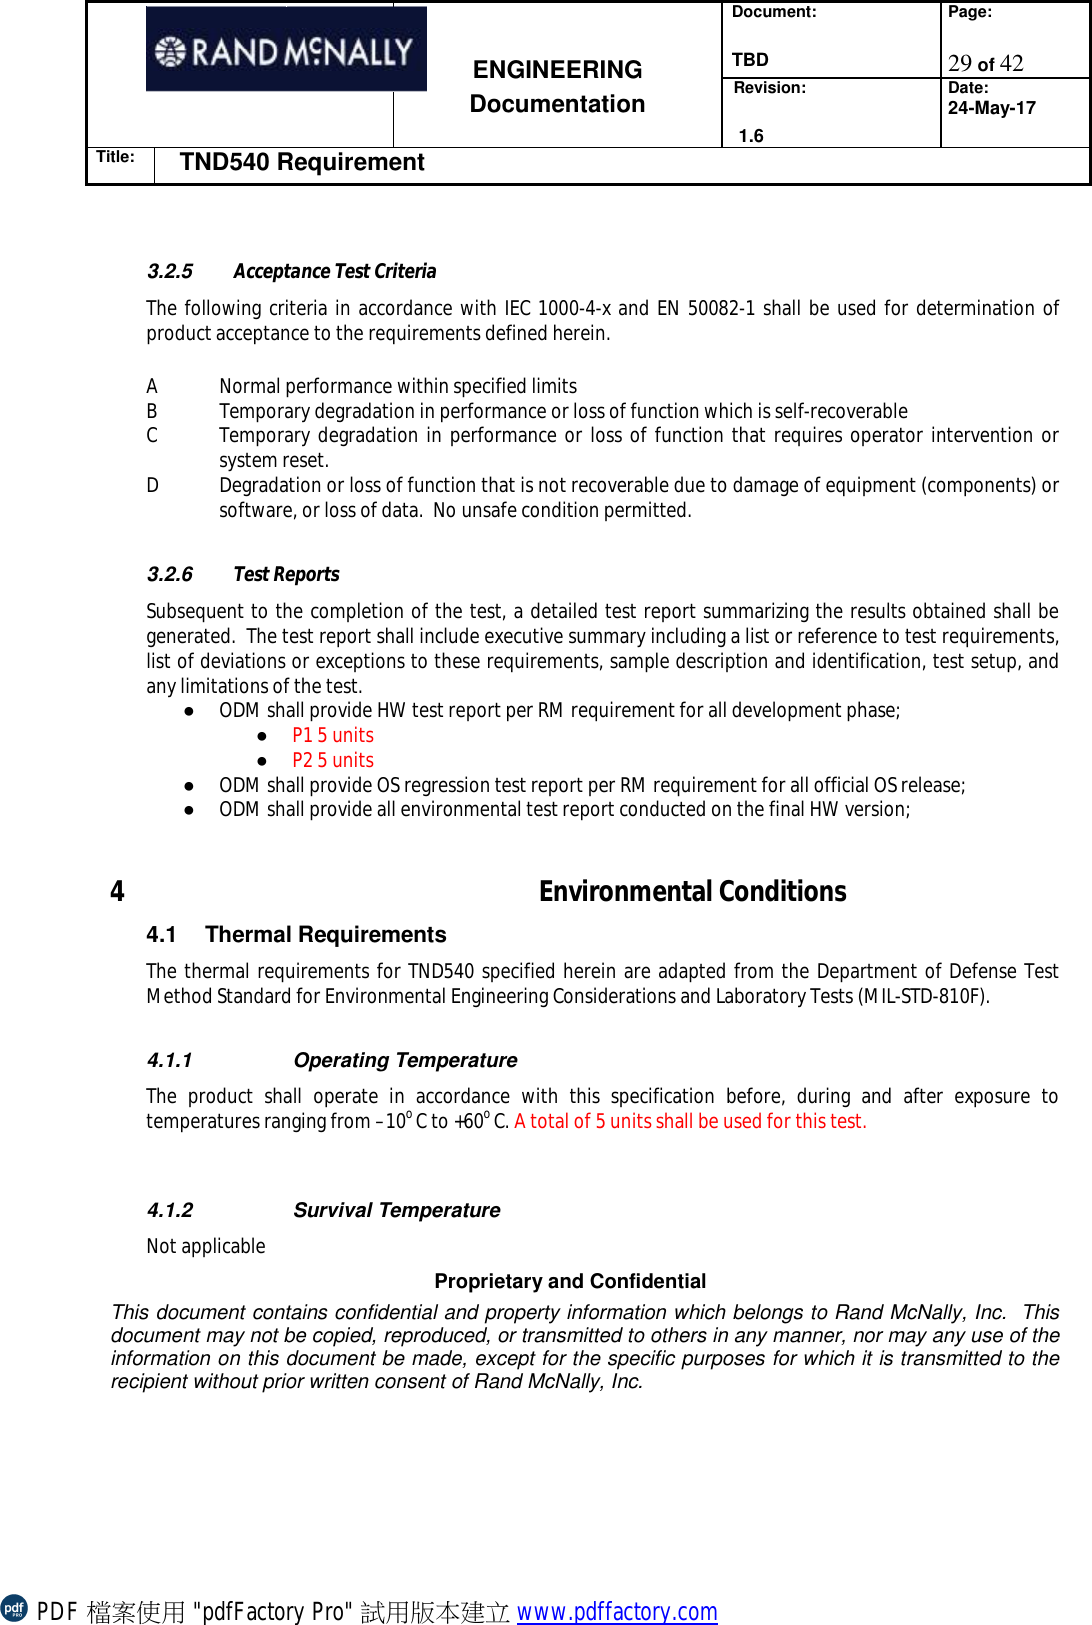 Document:  TBD Page:  29 of 42   ENGINEERING Documentation Revision:   1.6 Date: 24-May-17 Title: TND540 Requirement  Proprietary and Confidential This document contains confidential and property information which belongs to Rand McNally, Inc.  This document may not be copied, reproduced, or transmitted to others in any manner, nor may any use of the information on this document be made, except for the specific purposes for which it is transmitted to the recipient without prior written consent of Rand McNally, Inc.    3.2.5  Acceptance Test Criteria The following criteria in accordance with IEC 1000-4-x and EN 50082-1 shall be used for determination of product acceptance to the requirements defined herein.   A Normal performance within specified limits  B Temporary degradation in performance or loss of function which is self-recoverable C Temporary degradation in performance or loss of function that requires operator intervention or system reset. D Degradation or loss of function that is not recoverable due to damage of equipment (components) or software, or loss of data.  No unsafe condition permitted.   3.2.6  Test Reports Subsequent to the completion of the test, a detailed test report summarizing the results obtained shall be generated.  The test report shall include executive summary including a list or reference to test requirements, list of deviations or exceptions to these requirements, sample description and identification, test setup, and any limitations of the test.  ● ODM shall provide HW test report per RM requirement for all development phase;  ● P1 5 units ● P2 5 units  ● ODM shall provide OS regression test report per RM requirement for all official OS release; ● ODM shall provide all environmental test report conducted on the final HW version;  4 Environmental Conditions 4.1 Thermal Requirements The thermal requirements for TND540 specified herein are adapted from the Department of Defense Test Method Standard for Environmental Engineering Considerations and Laboratory Tests (MIL-STD-810F).  4.1.1  Operating Temperature The product shall operate in accordance with this specification before, during and after exposure to temperatures ranging from –10o C to +60o C. A total of 5 units shall be used for this test.   4.1.2  Survival Temperature Not applicable PDF 檔案使用 &quot;pdfFactory Pro&quot; 試用版本建立 www.pdffactory.com